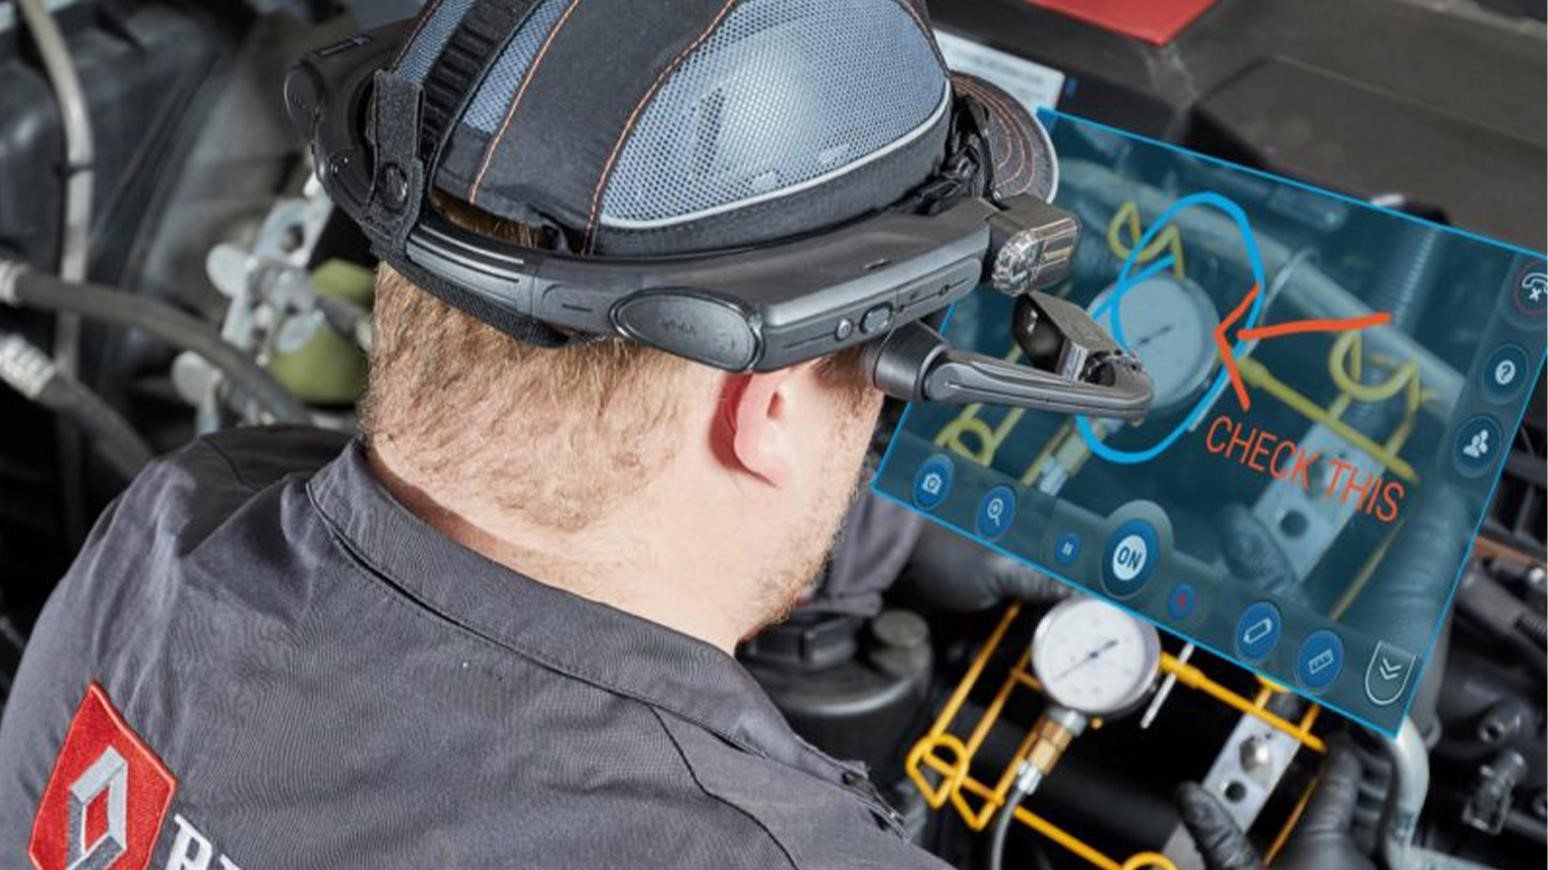 Renault Trucks Expands Use Of Its Optiview Augmented-Reality Remote Expert Solution To All 71 UK & Ireland Dealerships